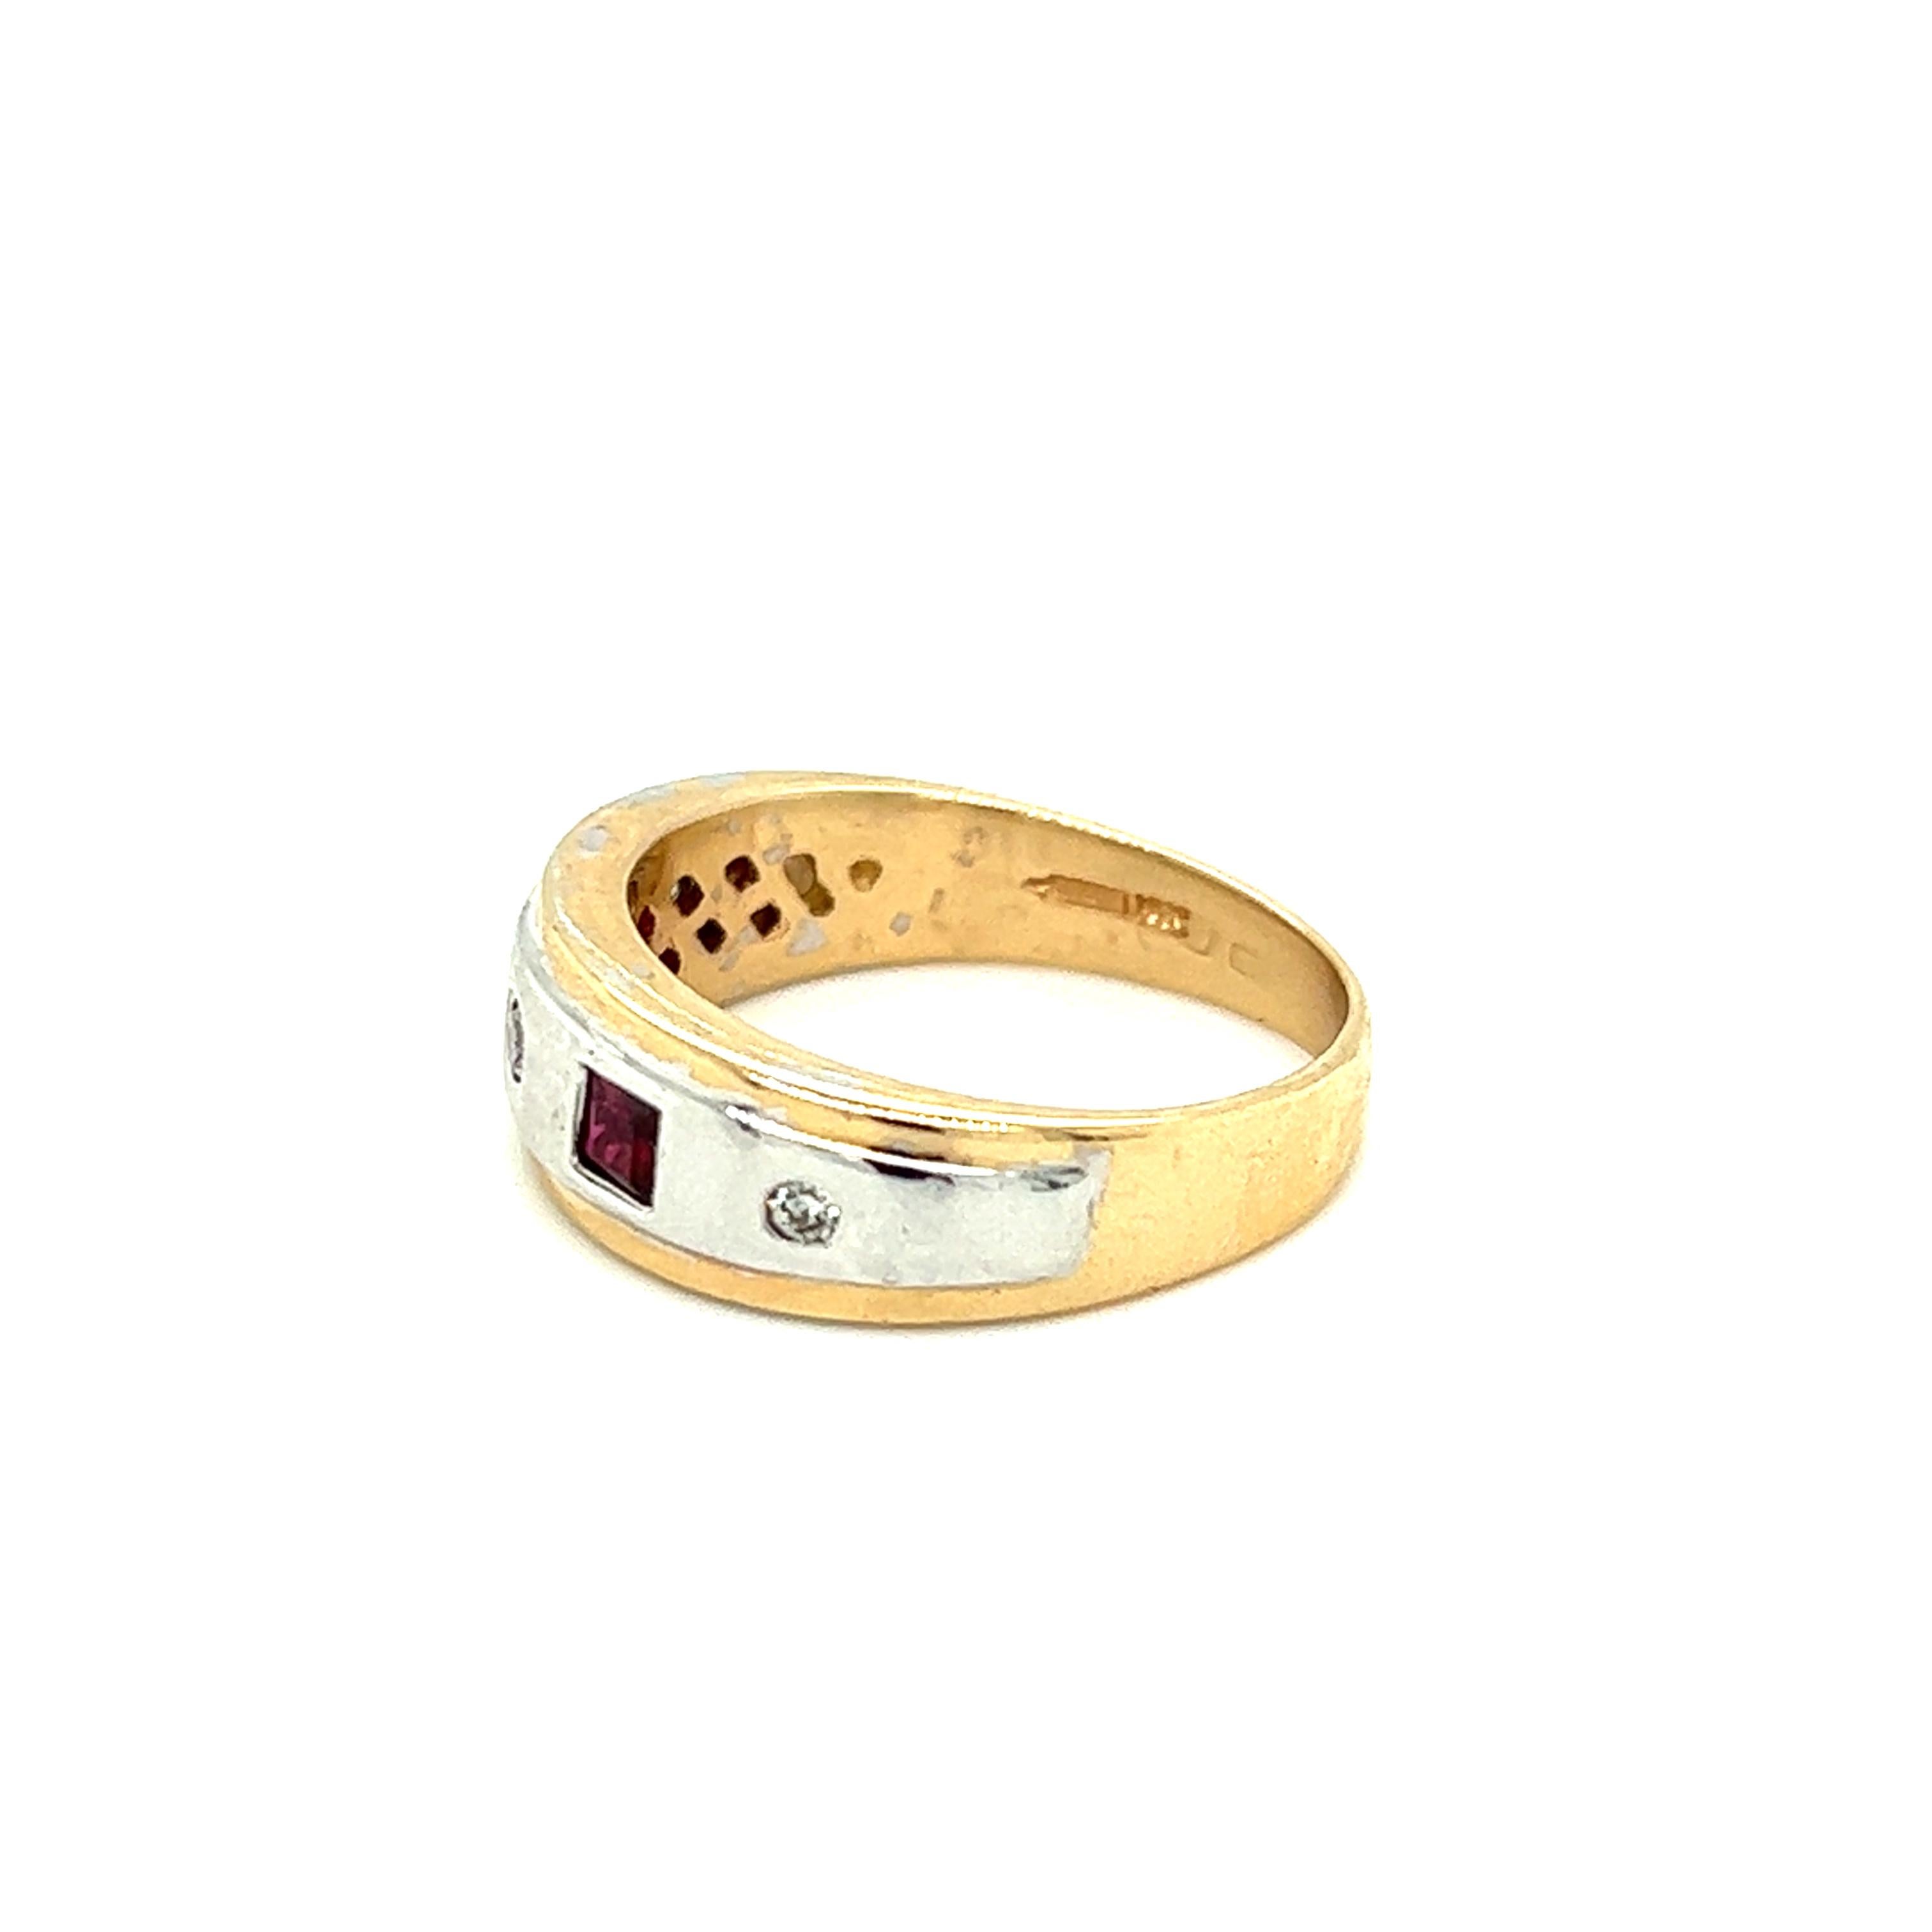 One 14-karat yellow and white gold band ring (stamped 